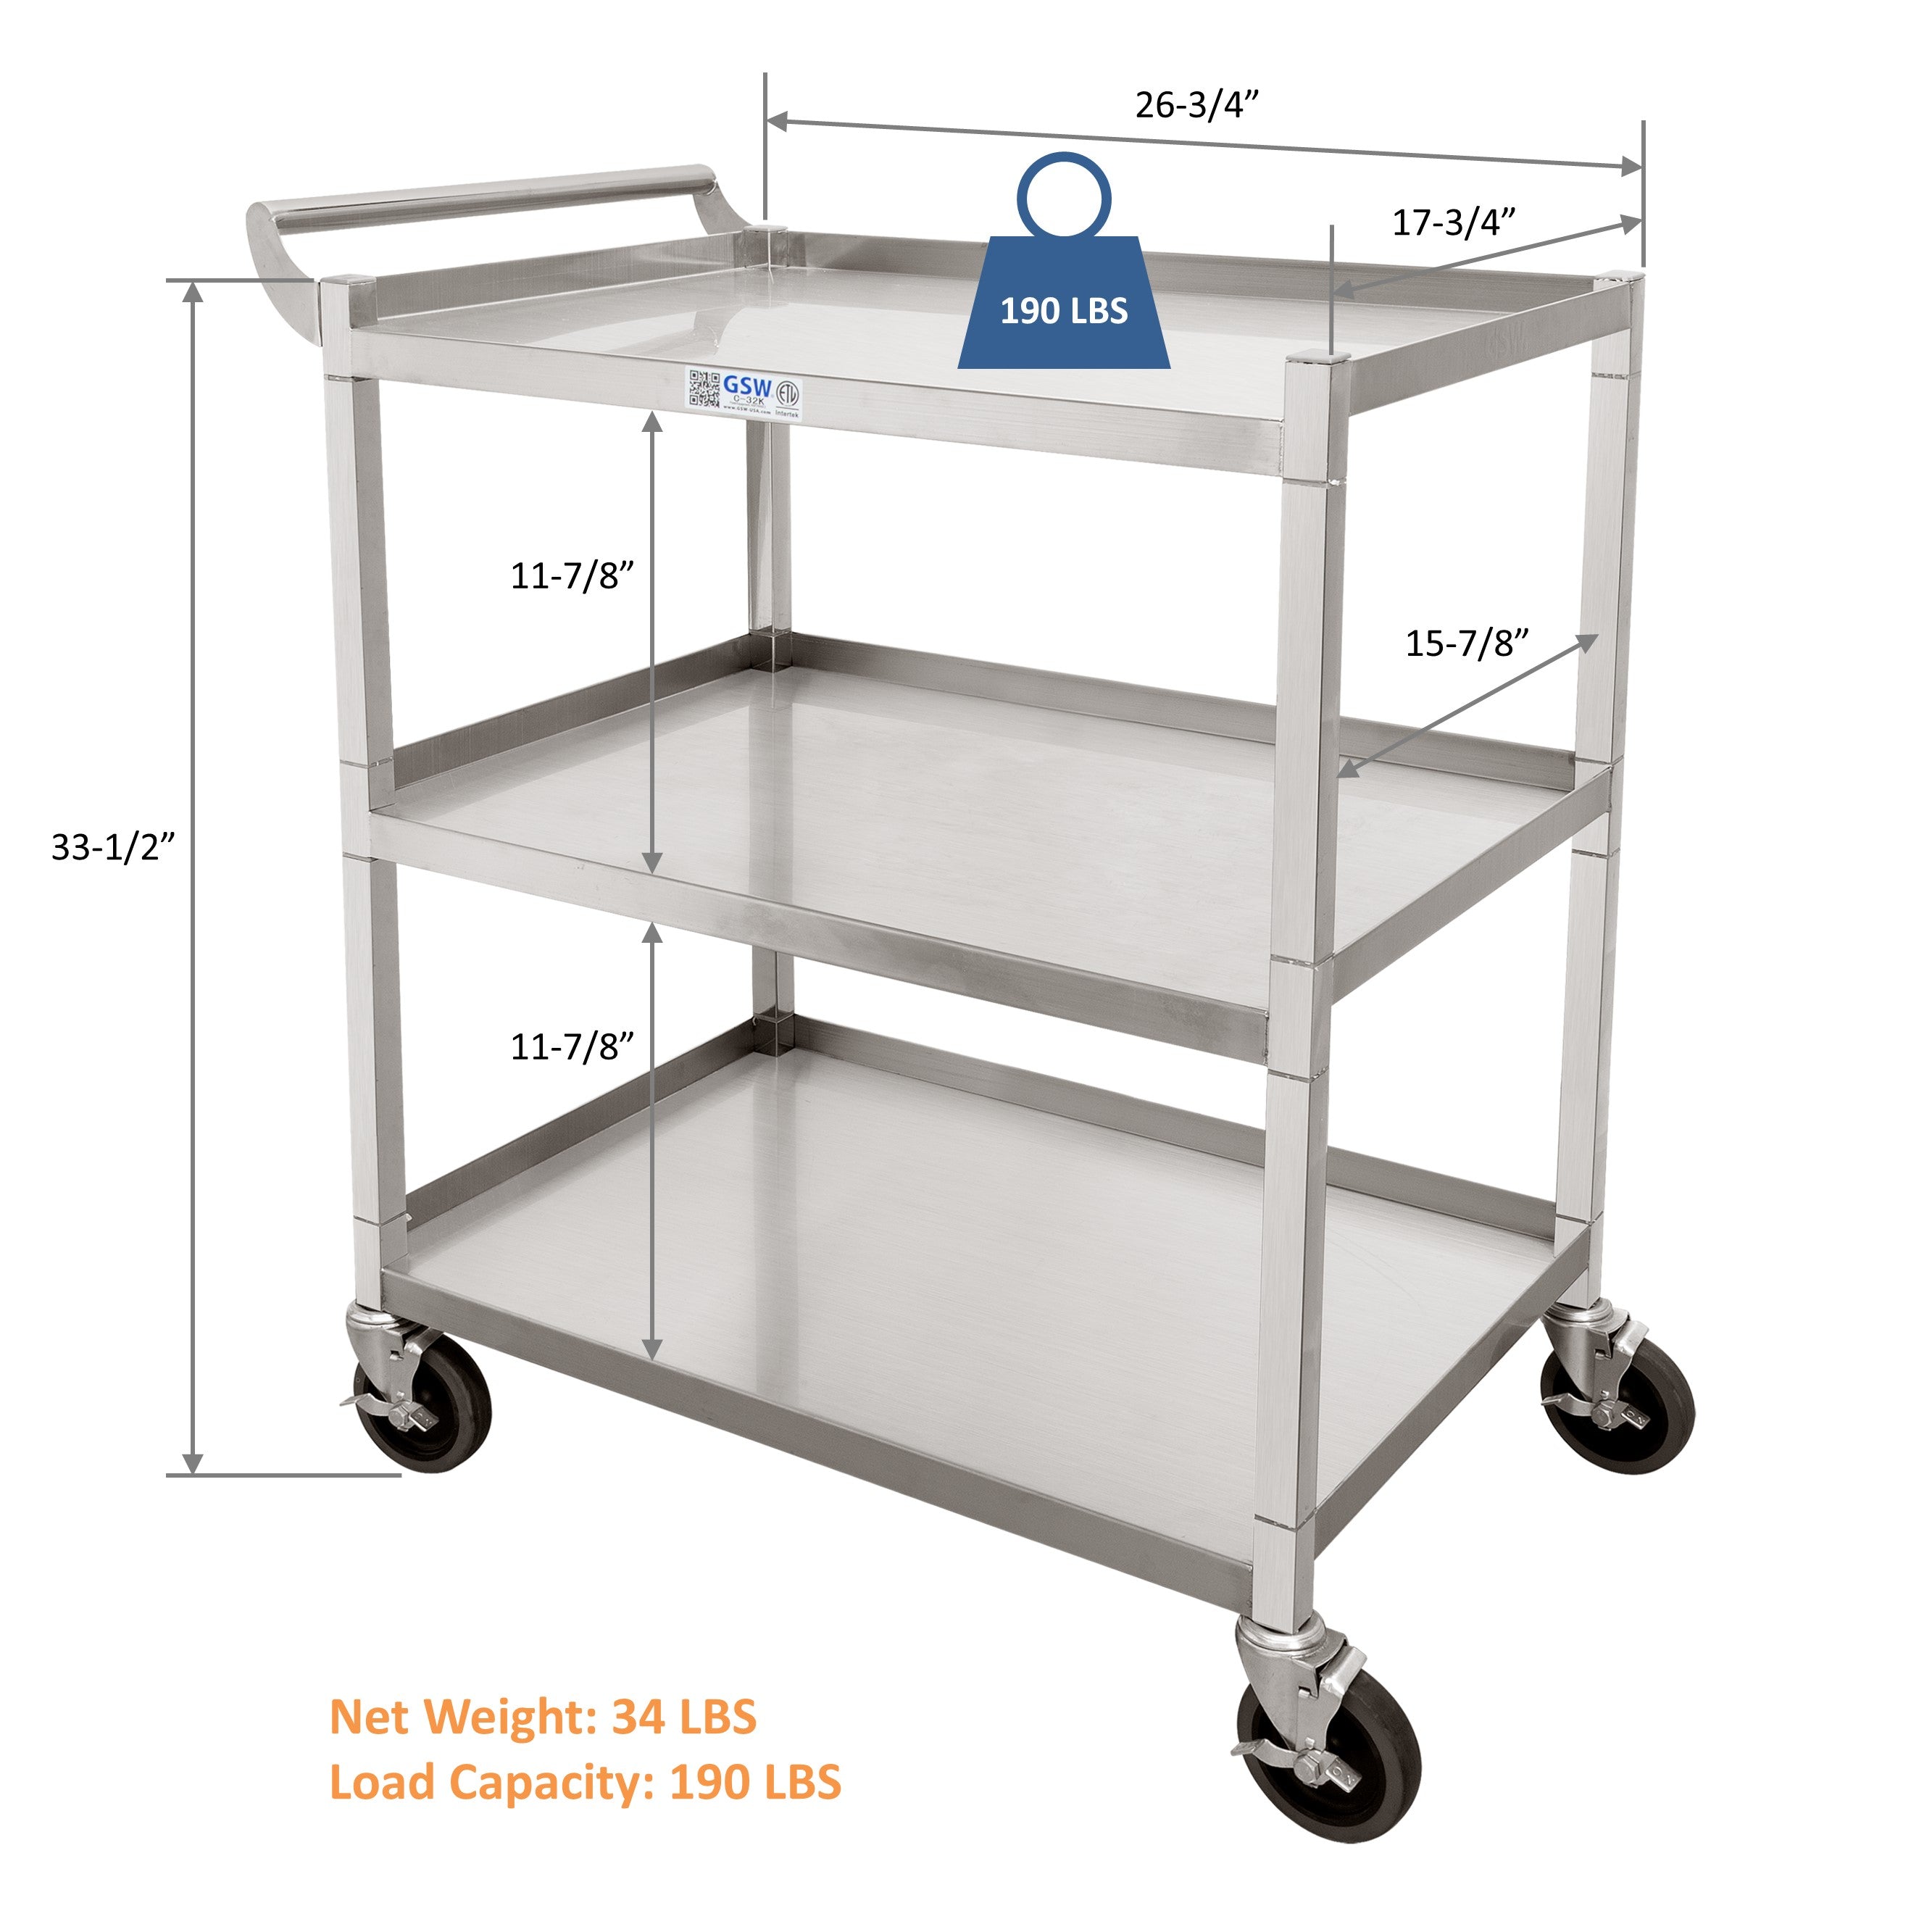 GSW C-32K Stainless Steel Solid 1-Inch Tubular Utility Cart with 4-3/4 Swivel Casters (29-1/4"W x 17-3/4"D x 35-1/2"H)